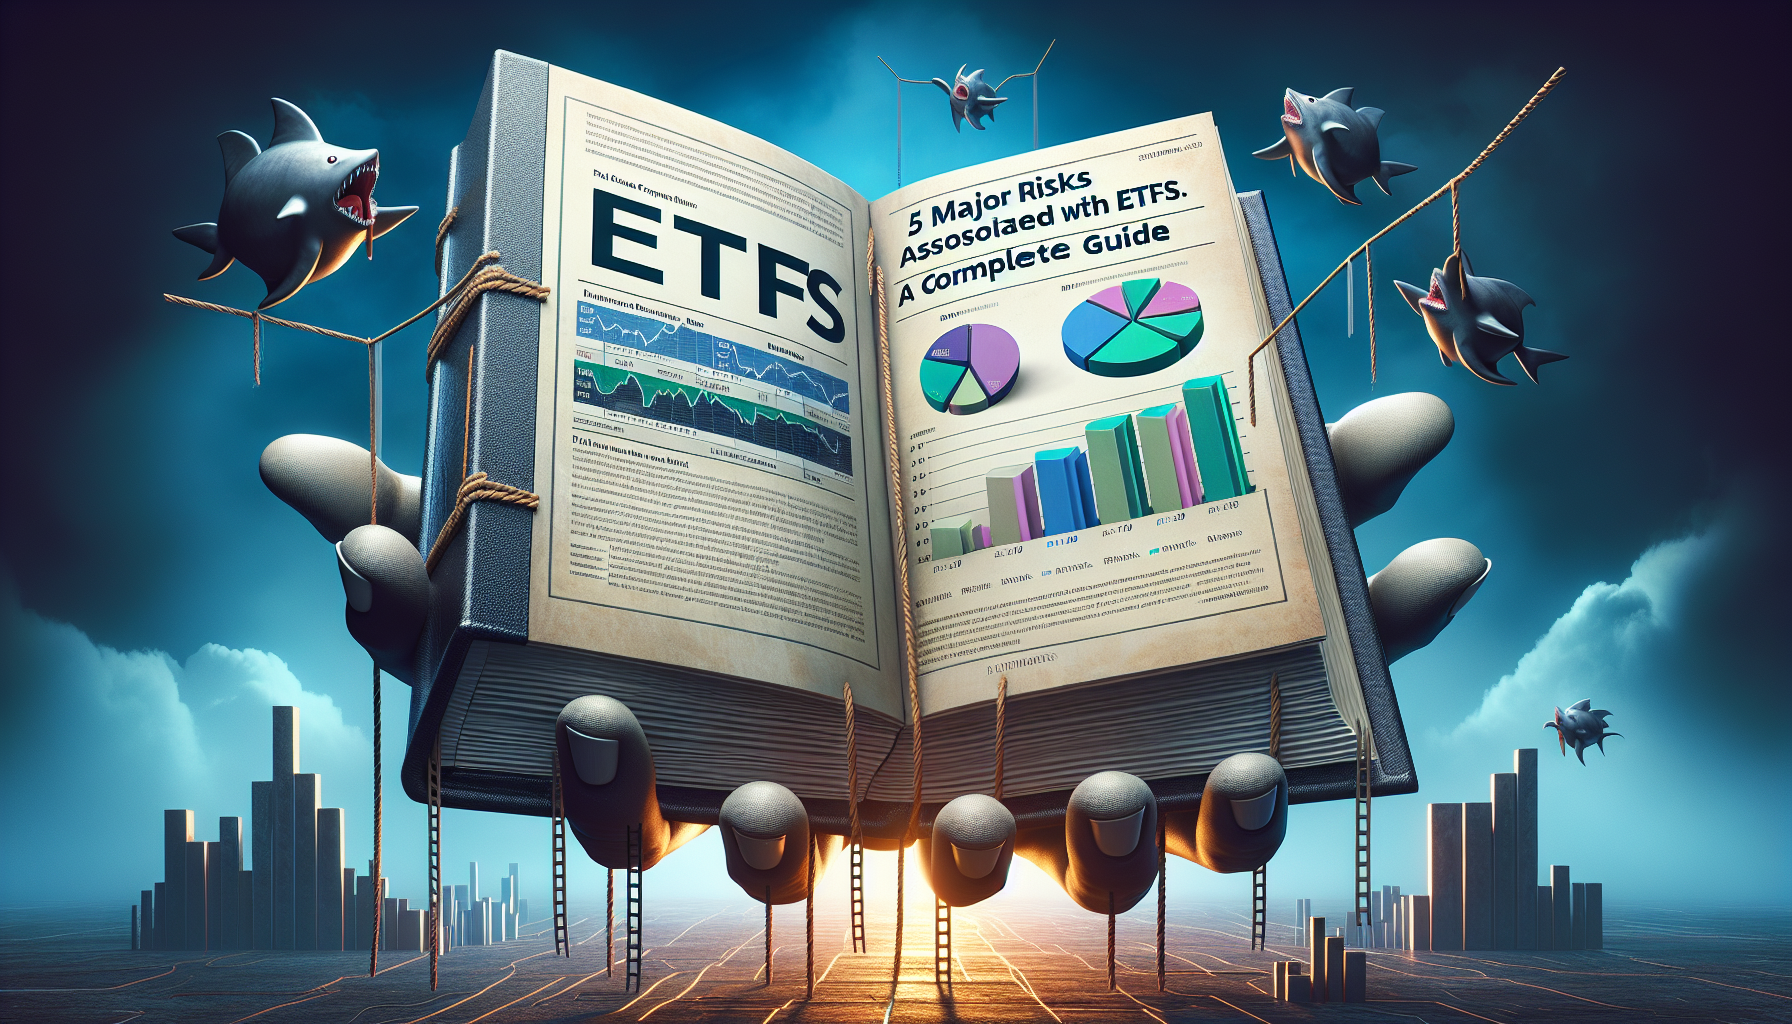 5 major risks associated with ETFs: A complete guide